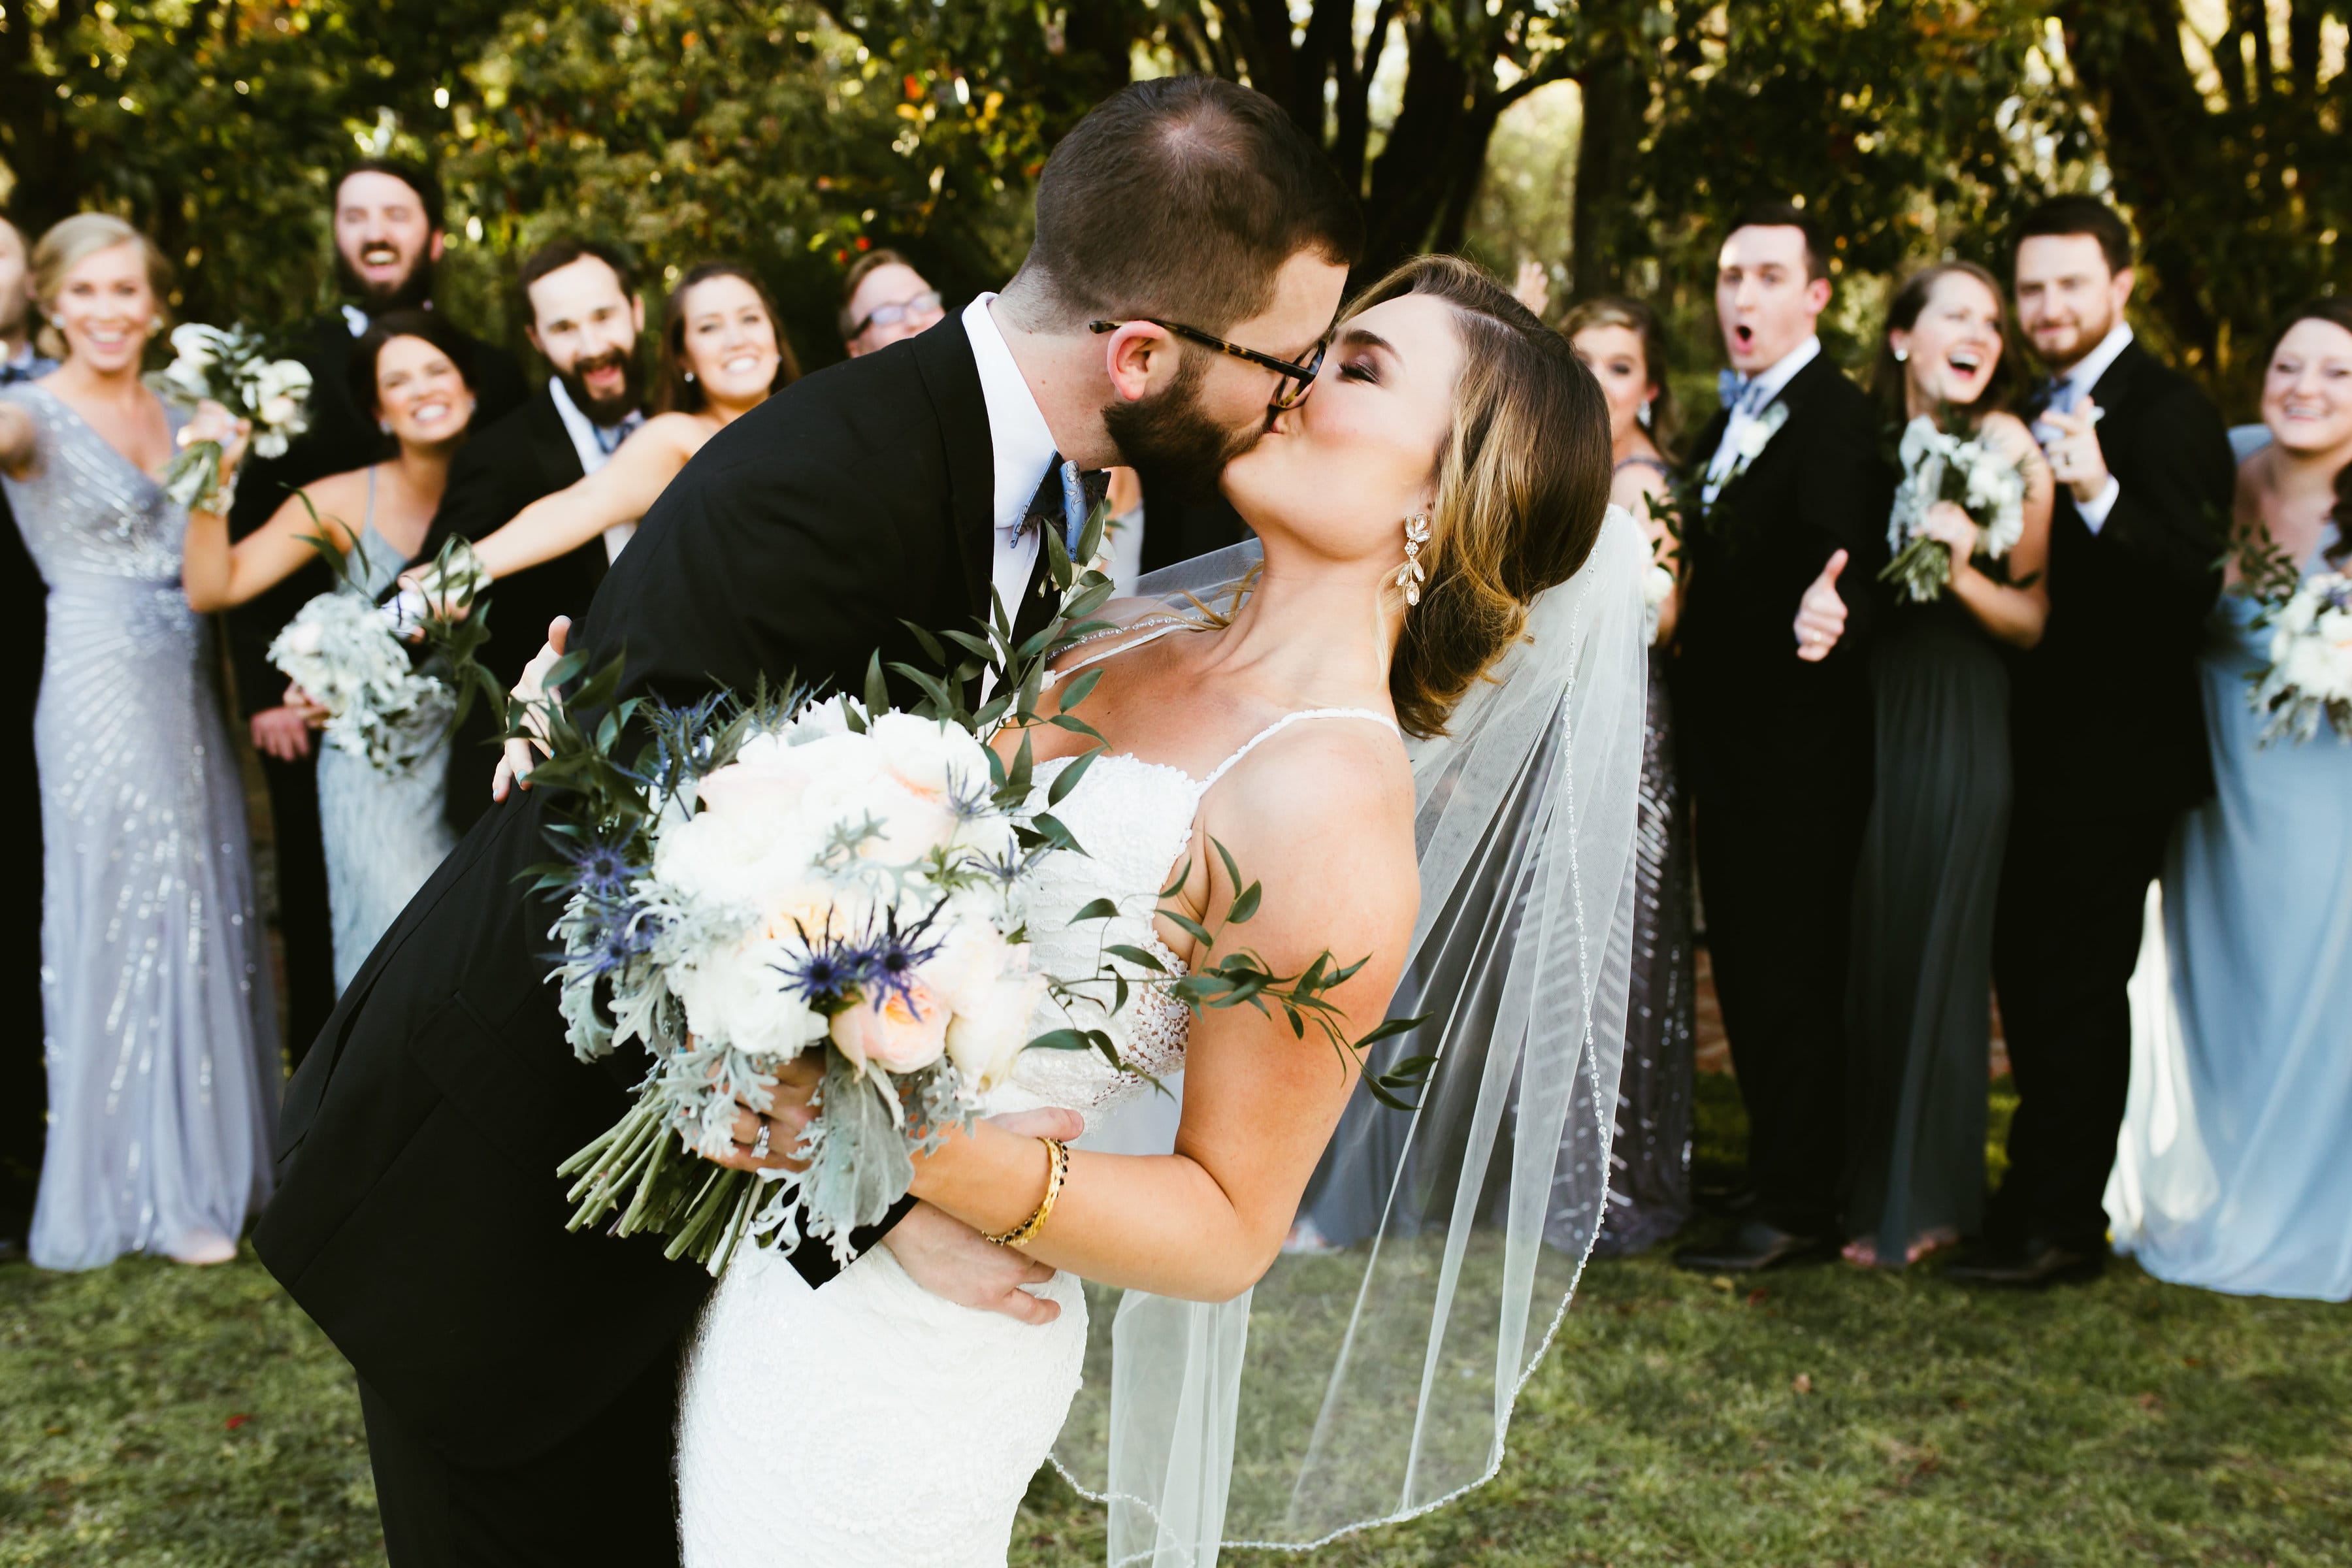 97 Wedding Pictures That Will Bring Tears To Your Eyes